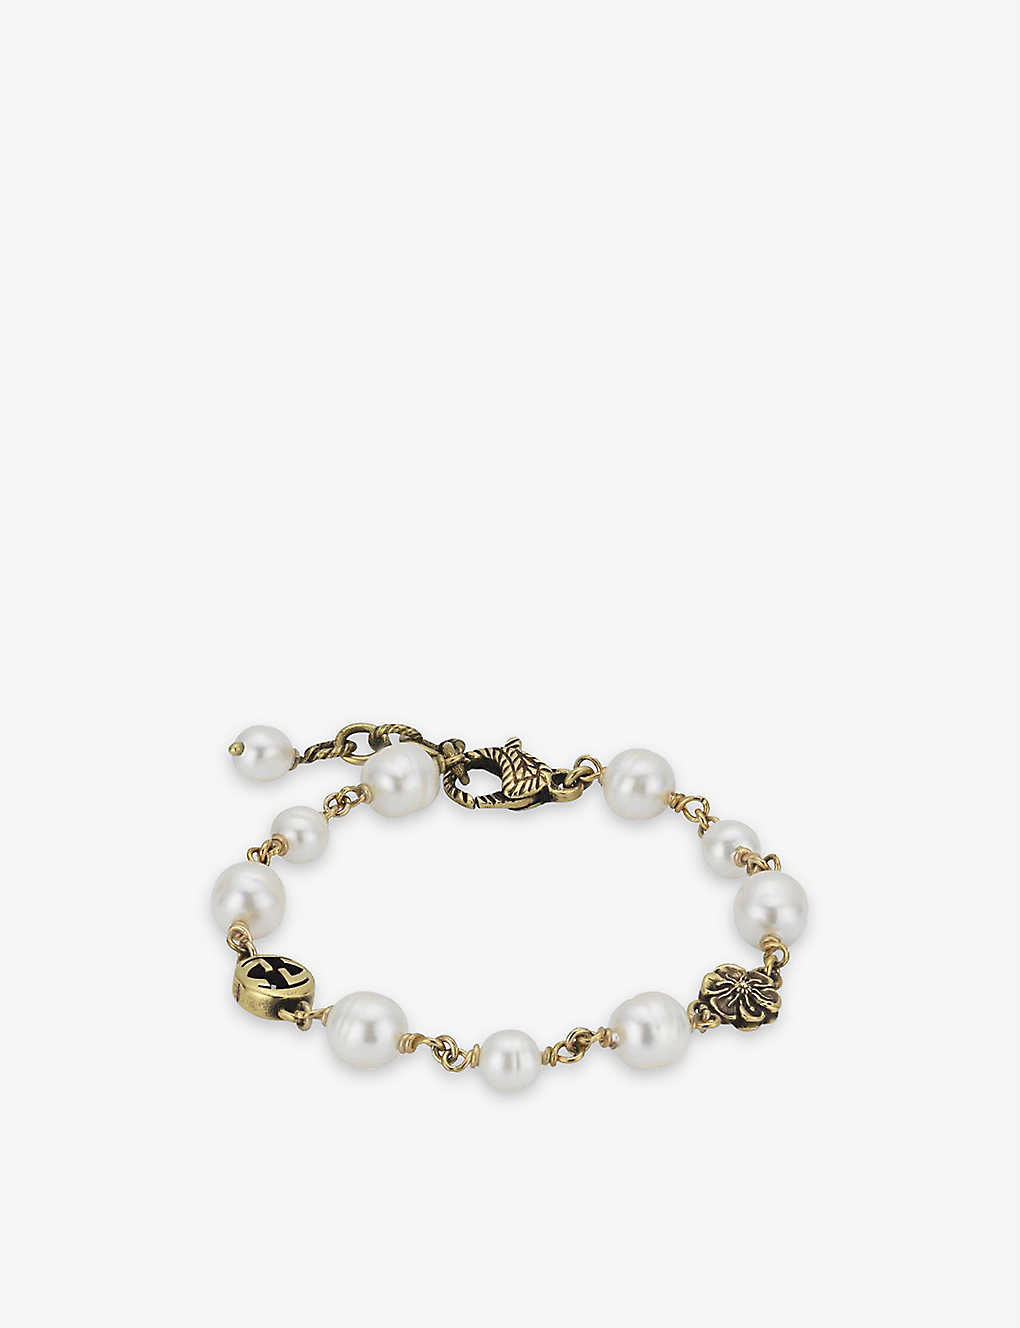 G-flower glass pearl and gold-toned metal bracelet(9281523)